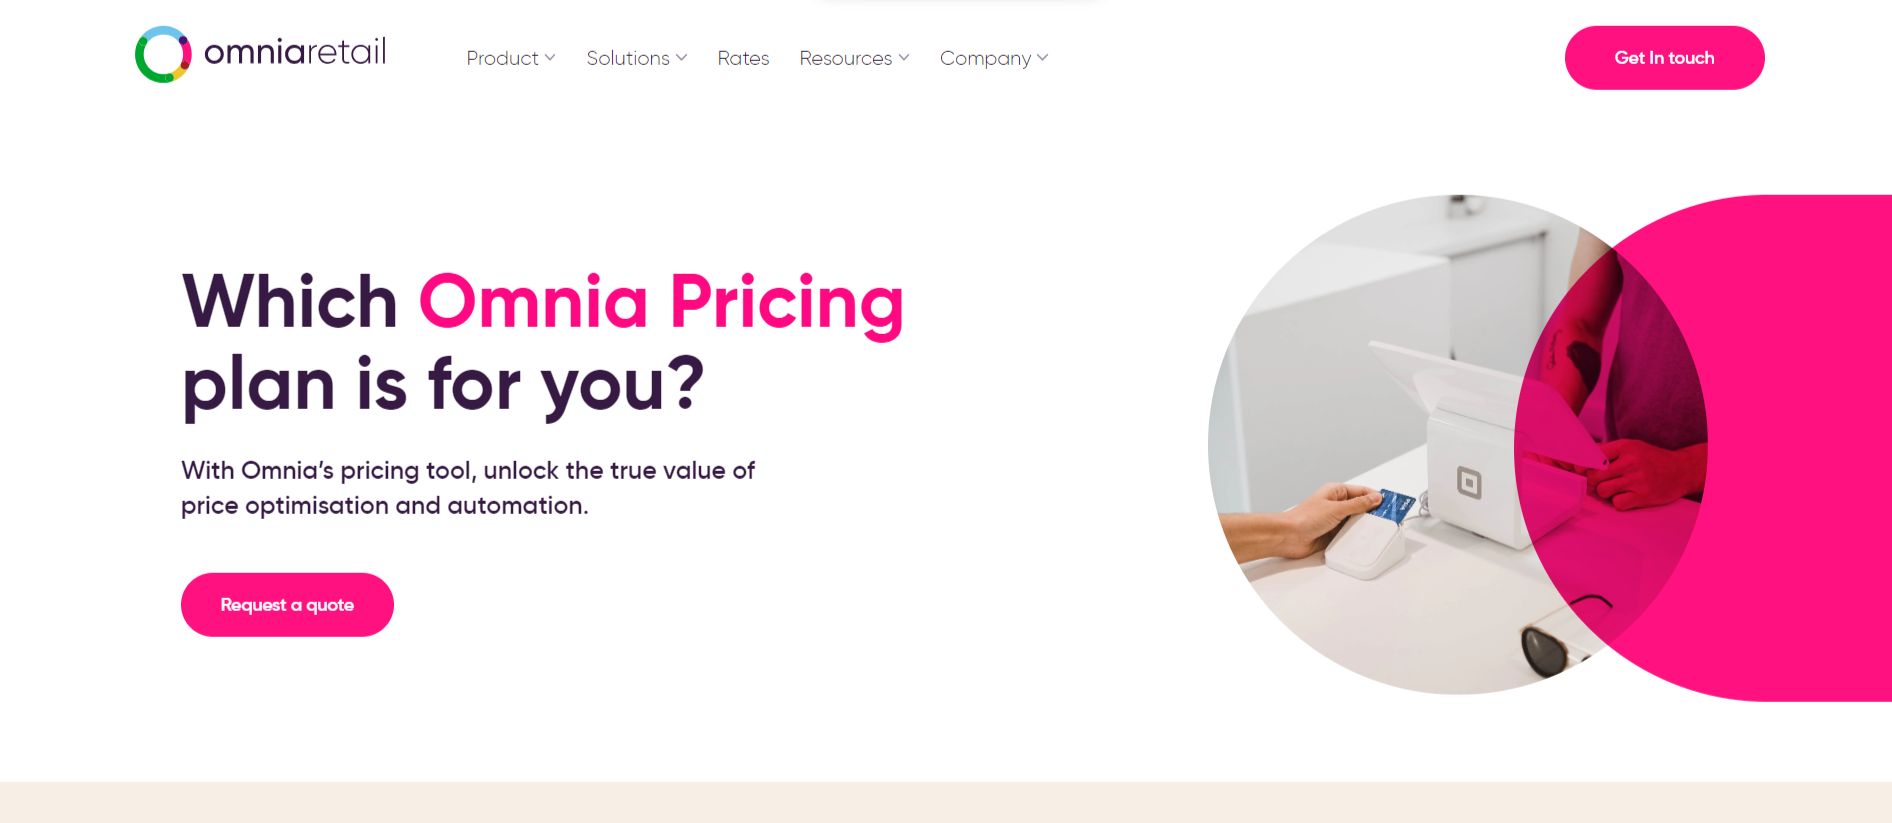 Omnia’s pricing page